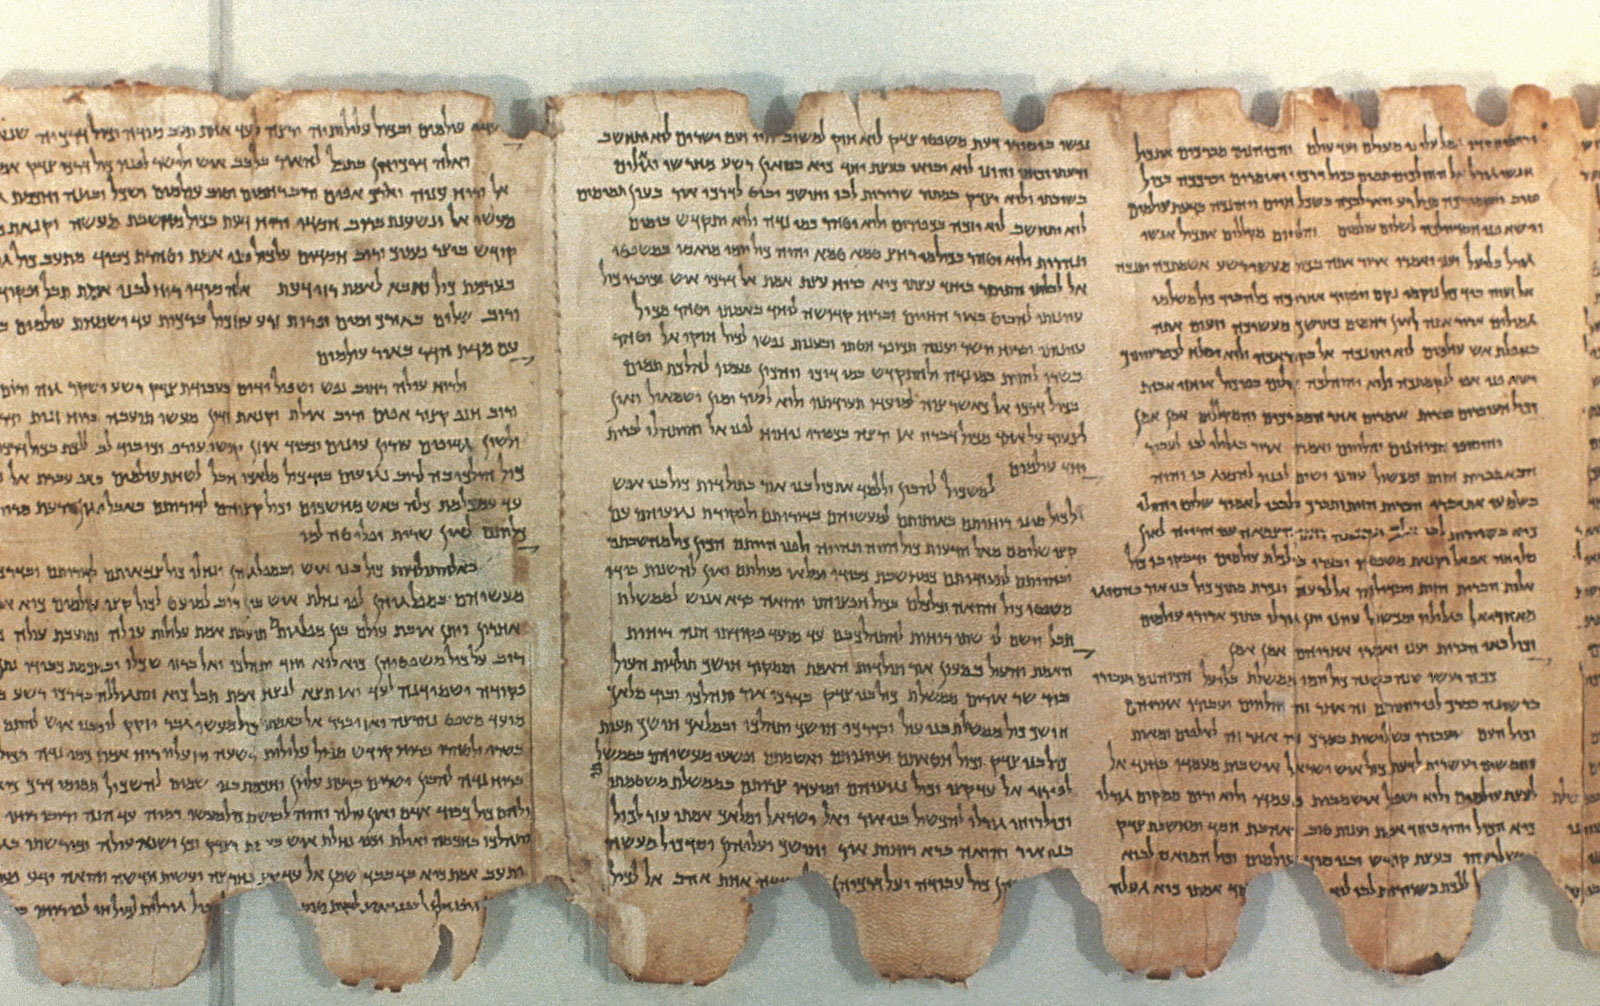 How the Dead Sea Scrolls authors rewrote the Bible, literally